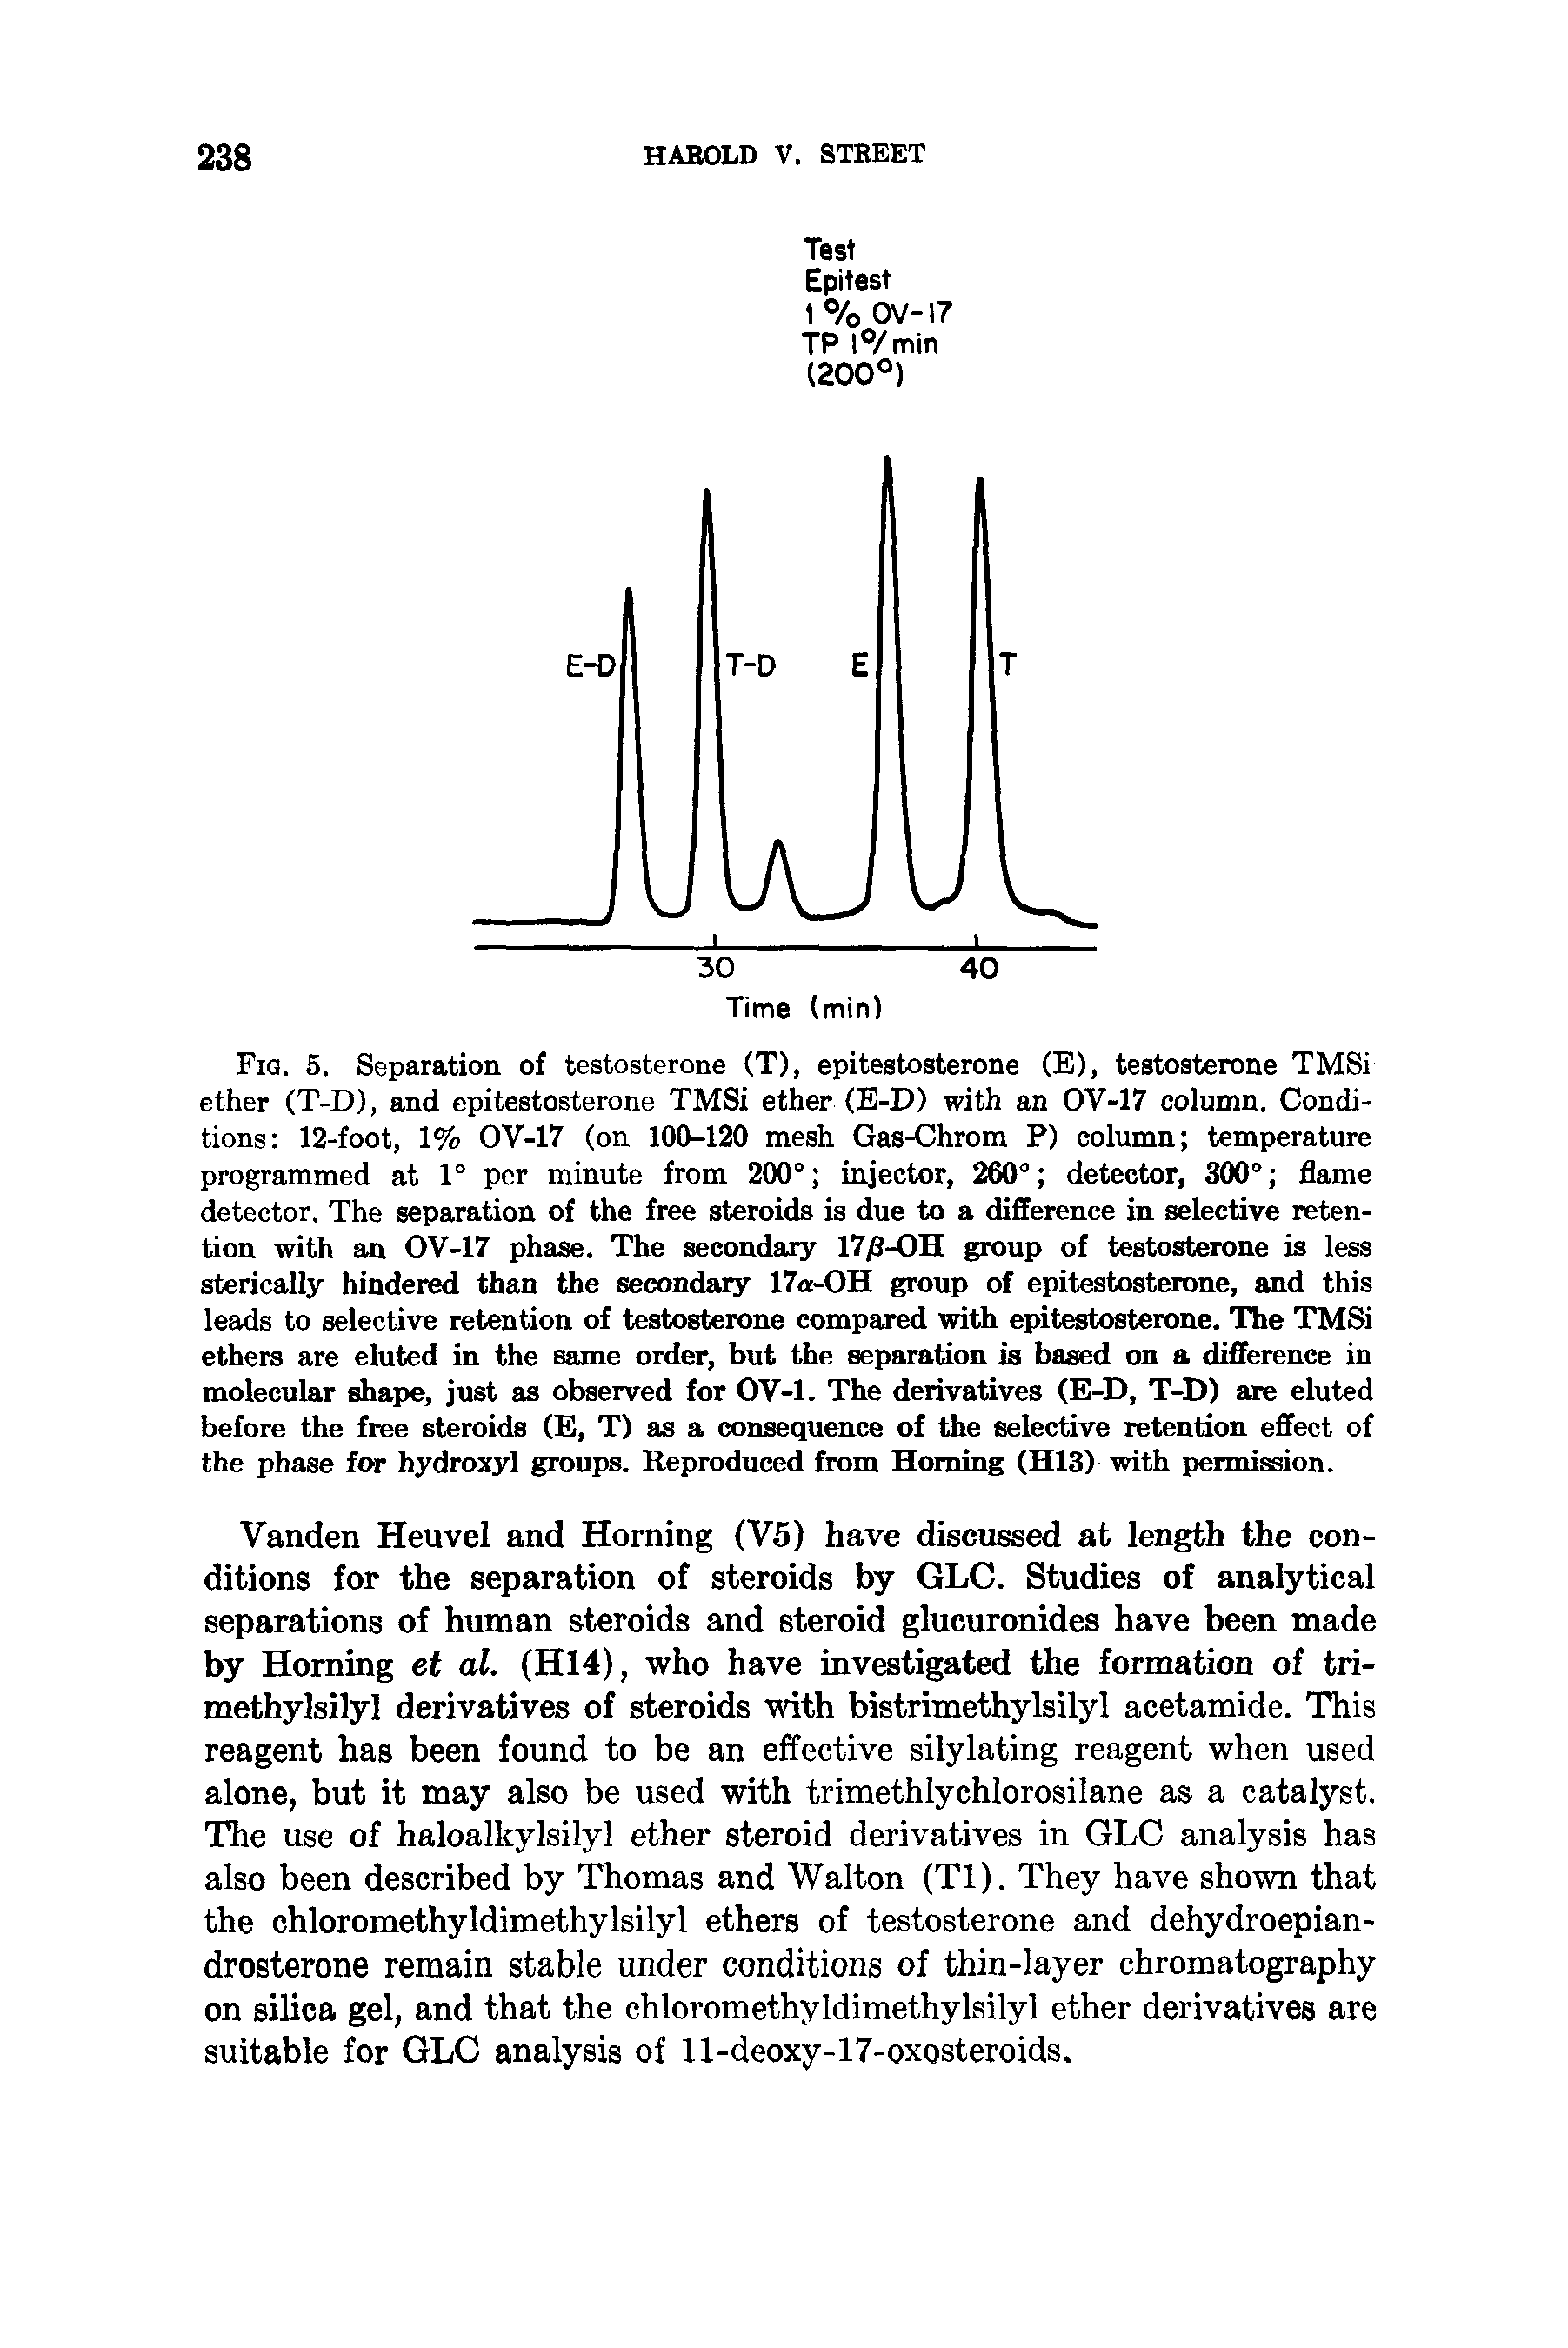 Fig. 5. Separation of testosterone (T), epitestosterone (E), testosterone TMSi ether (T-D), and epitestosterone TMSi ether (E-D) with an OV-17 column. Conditions 12-foot, 1% OV-17 (on 100-120 mesh Gas-Chrom P) column temperature programmed at 1° per minute from 200° injector, 260° detector, 300° flame detector. The separation of the free steroids is due to a difference in selective retention with an OV-17 phase. The secondary 17 8-OH group of testosterone is less sterically hindered than the secondary 17a-OH group of epitestosterone, and this leads to selective retention of testosterone compared with epitestosterone. The TMSi ethers are eluted in the same order, but the separation is based on a difference in molecular shape, just as observed for OV-1. The derivatives (E-D, T-D) are eluted before the free steroids (E, T) as a consequence of the selective retention effect of the phase for hydroxyl groups. Reproduced from Homing (H13) with permission.